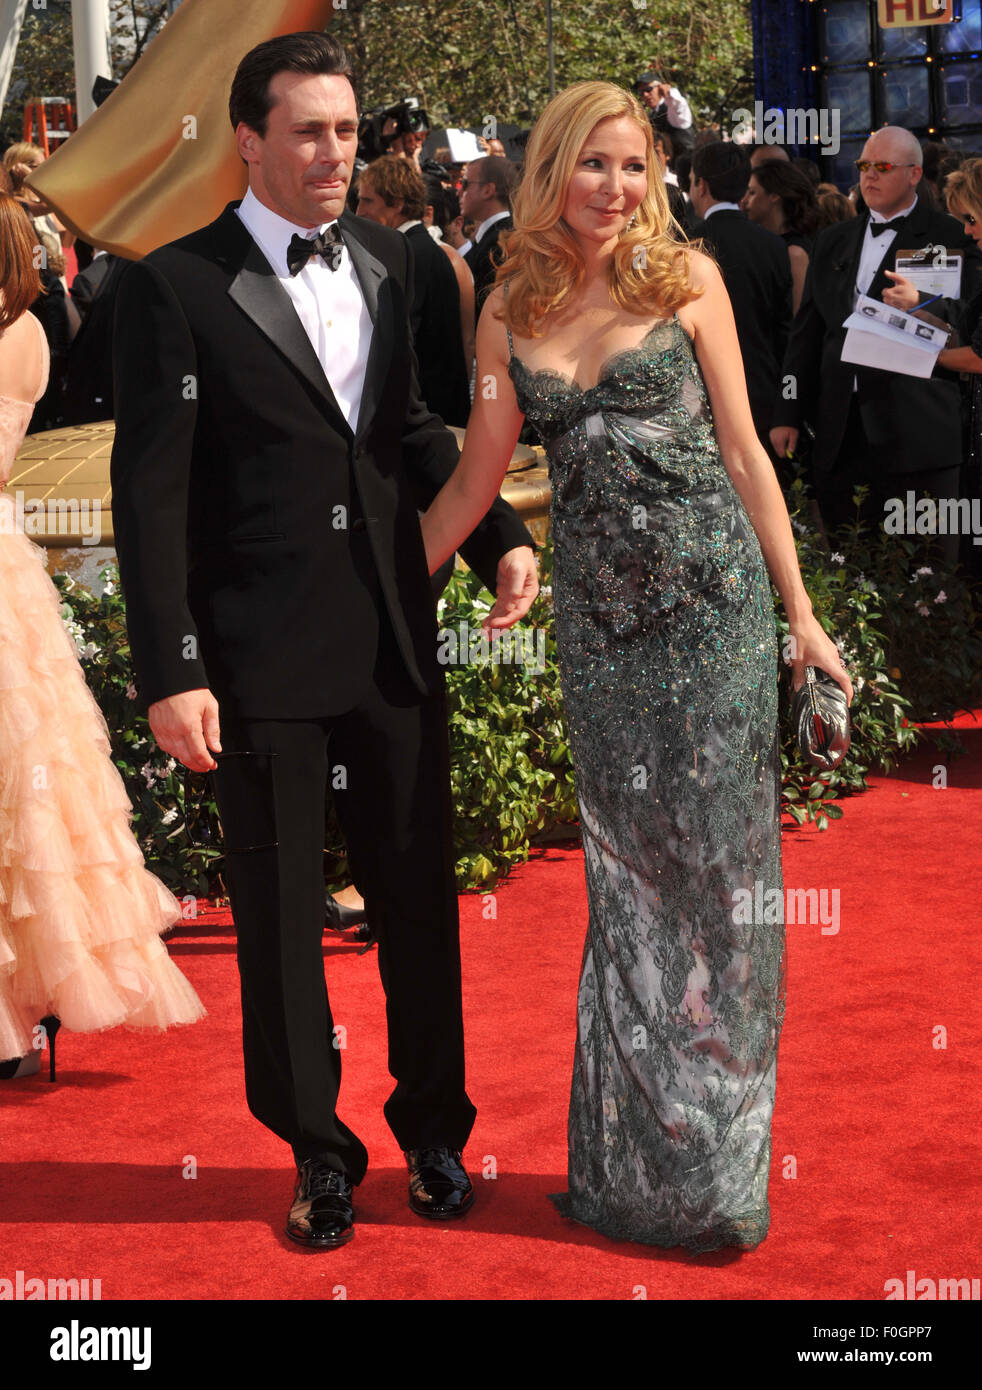 LOS ANGELES, CA - AUGUST 29, 2010: Jon Hamm & Jennifer Westfeldt at the 2010 Primetime Emmy Awards at the Nokia Theatre L.A. Live in downtown Los Angeles. Stock Photo